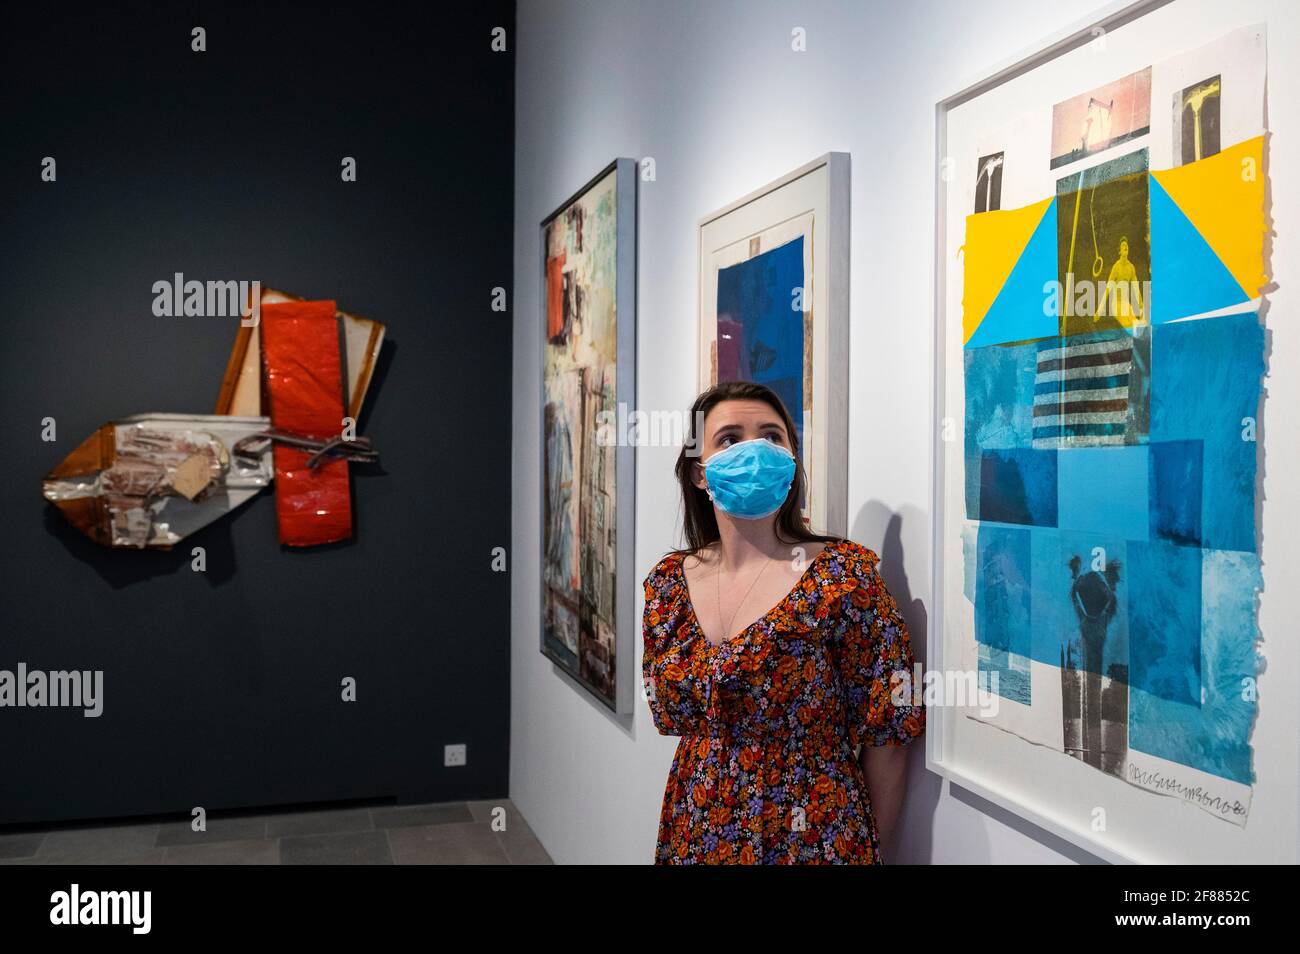 London, UK.  12 April 2021. A staff member poses with (R) 'Flue', 1980, by Robert Rauschenberg at the delayed opening of Robert Rauschenberg’s “Metal, Ink and Dye: Late Works from Captiva Island” exhibition at BASTIAN gallery in Mayfair.  The UK government’s coronavirus roadmap out of lockdown has allowed art galleries to reopen today. The exhibition runs 13 April to 8 May 2021. Credit: Stephen Chung / Alamy Live News Stock Photo